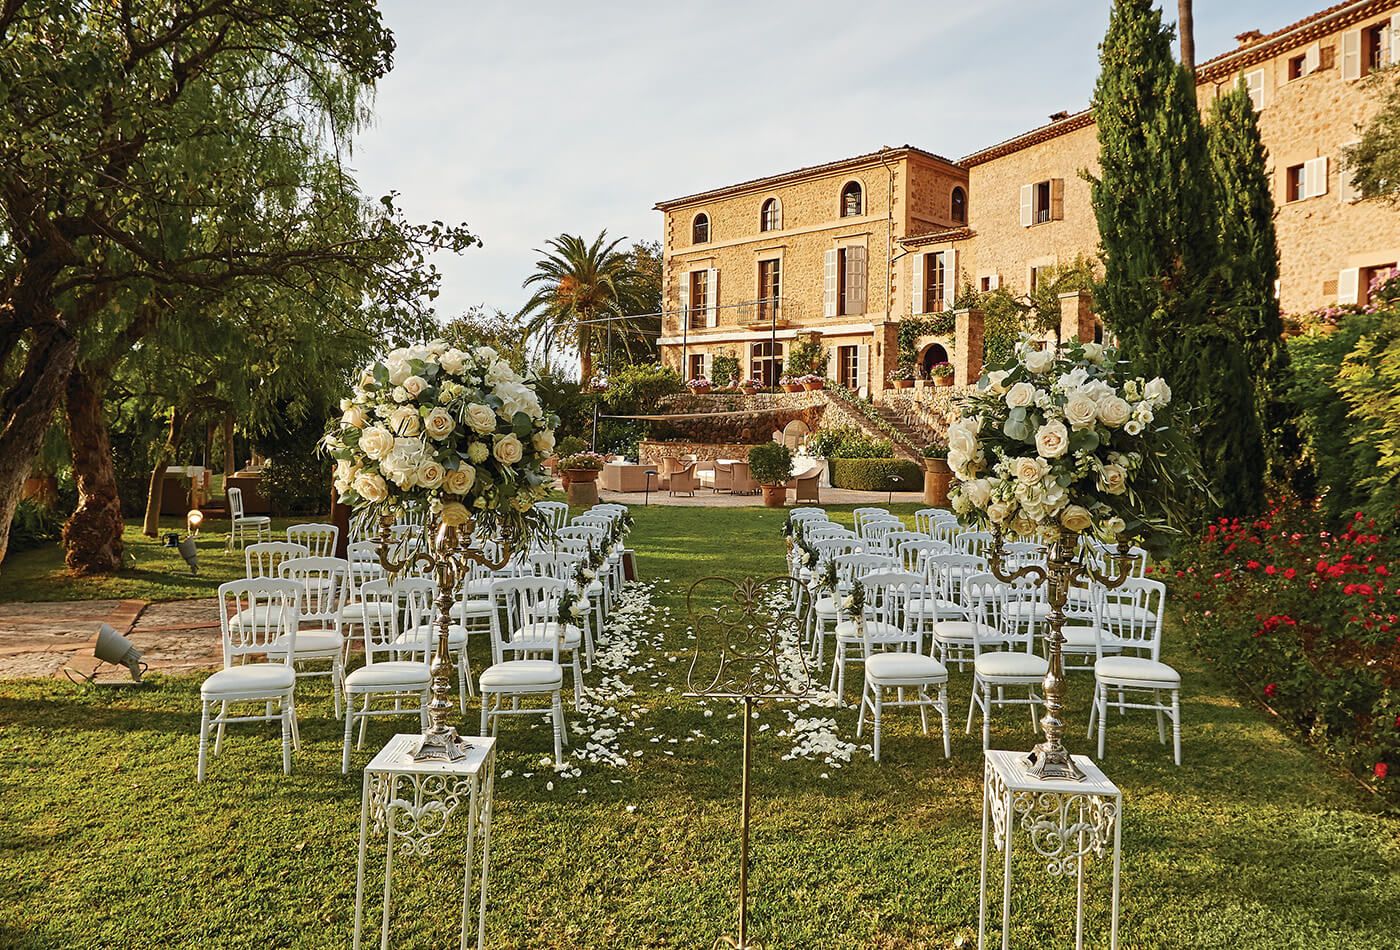 Wedding ceremony in the gardens of the venue, white seating and roses